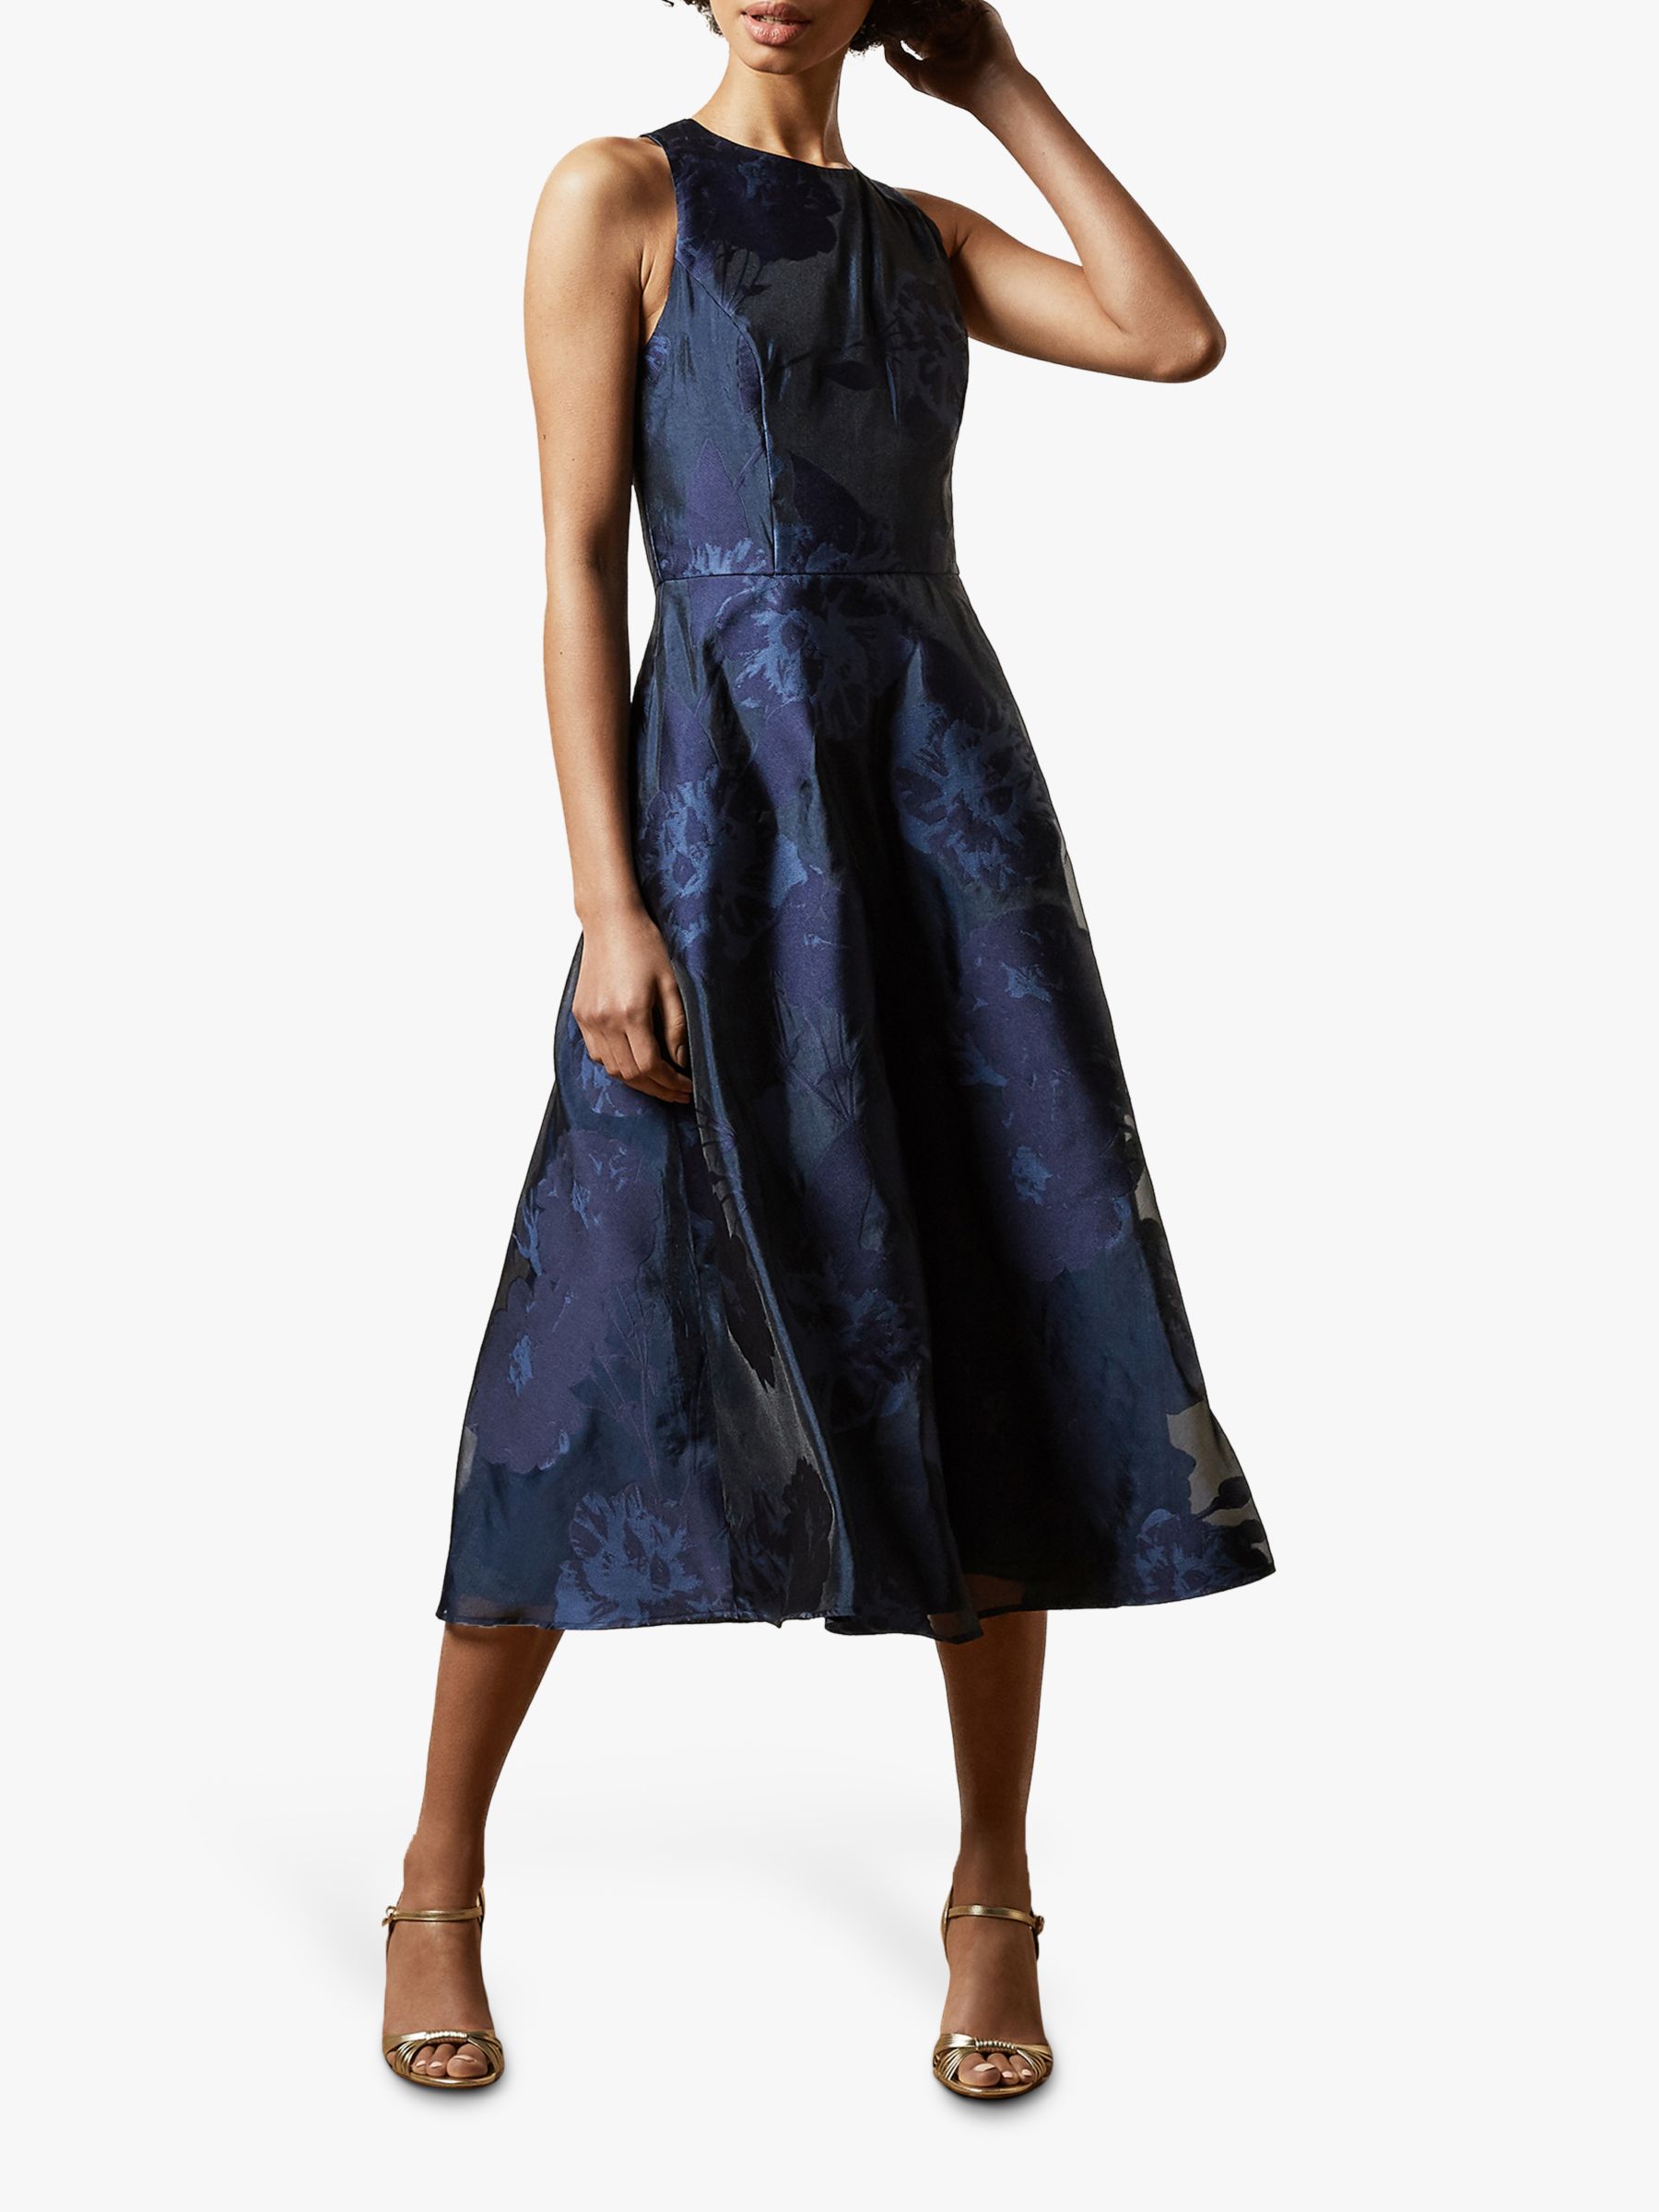 Ted Baker Wylieh Floral Jacquard Midi Dress at John Lewis & Partners